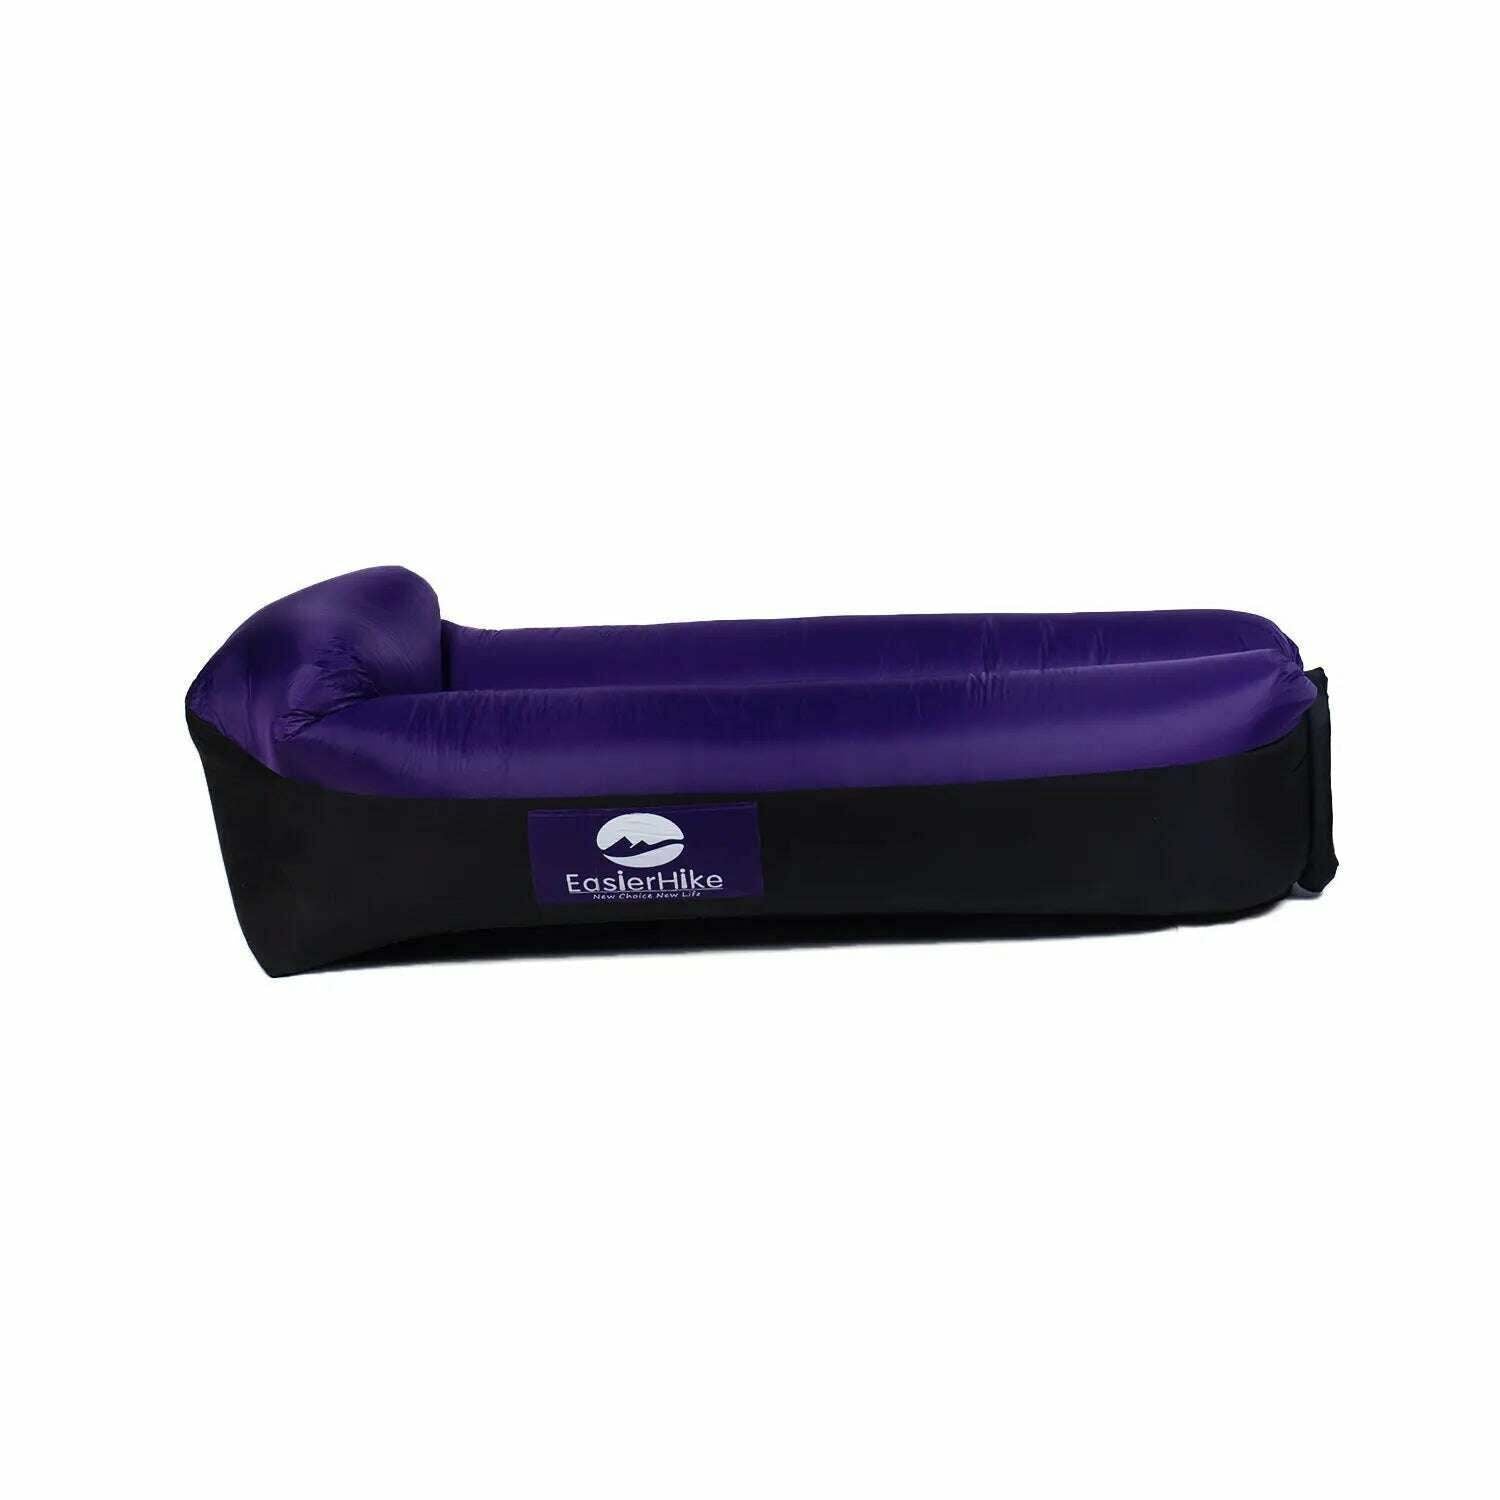 KIMLUD, Beach Lawn Casual Lazy Inflatable Sofa Portable Inflatable Bed Trekking In The Woods Off-road Air Bed Outdoor and Indoor, Purple black, KIMLUD Womens Clothes